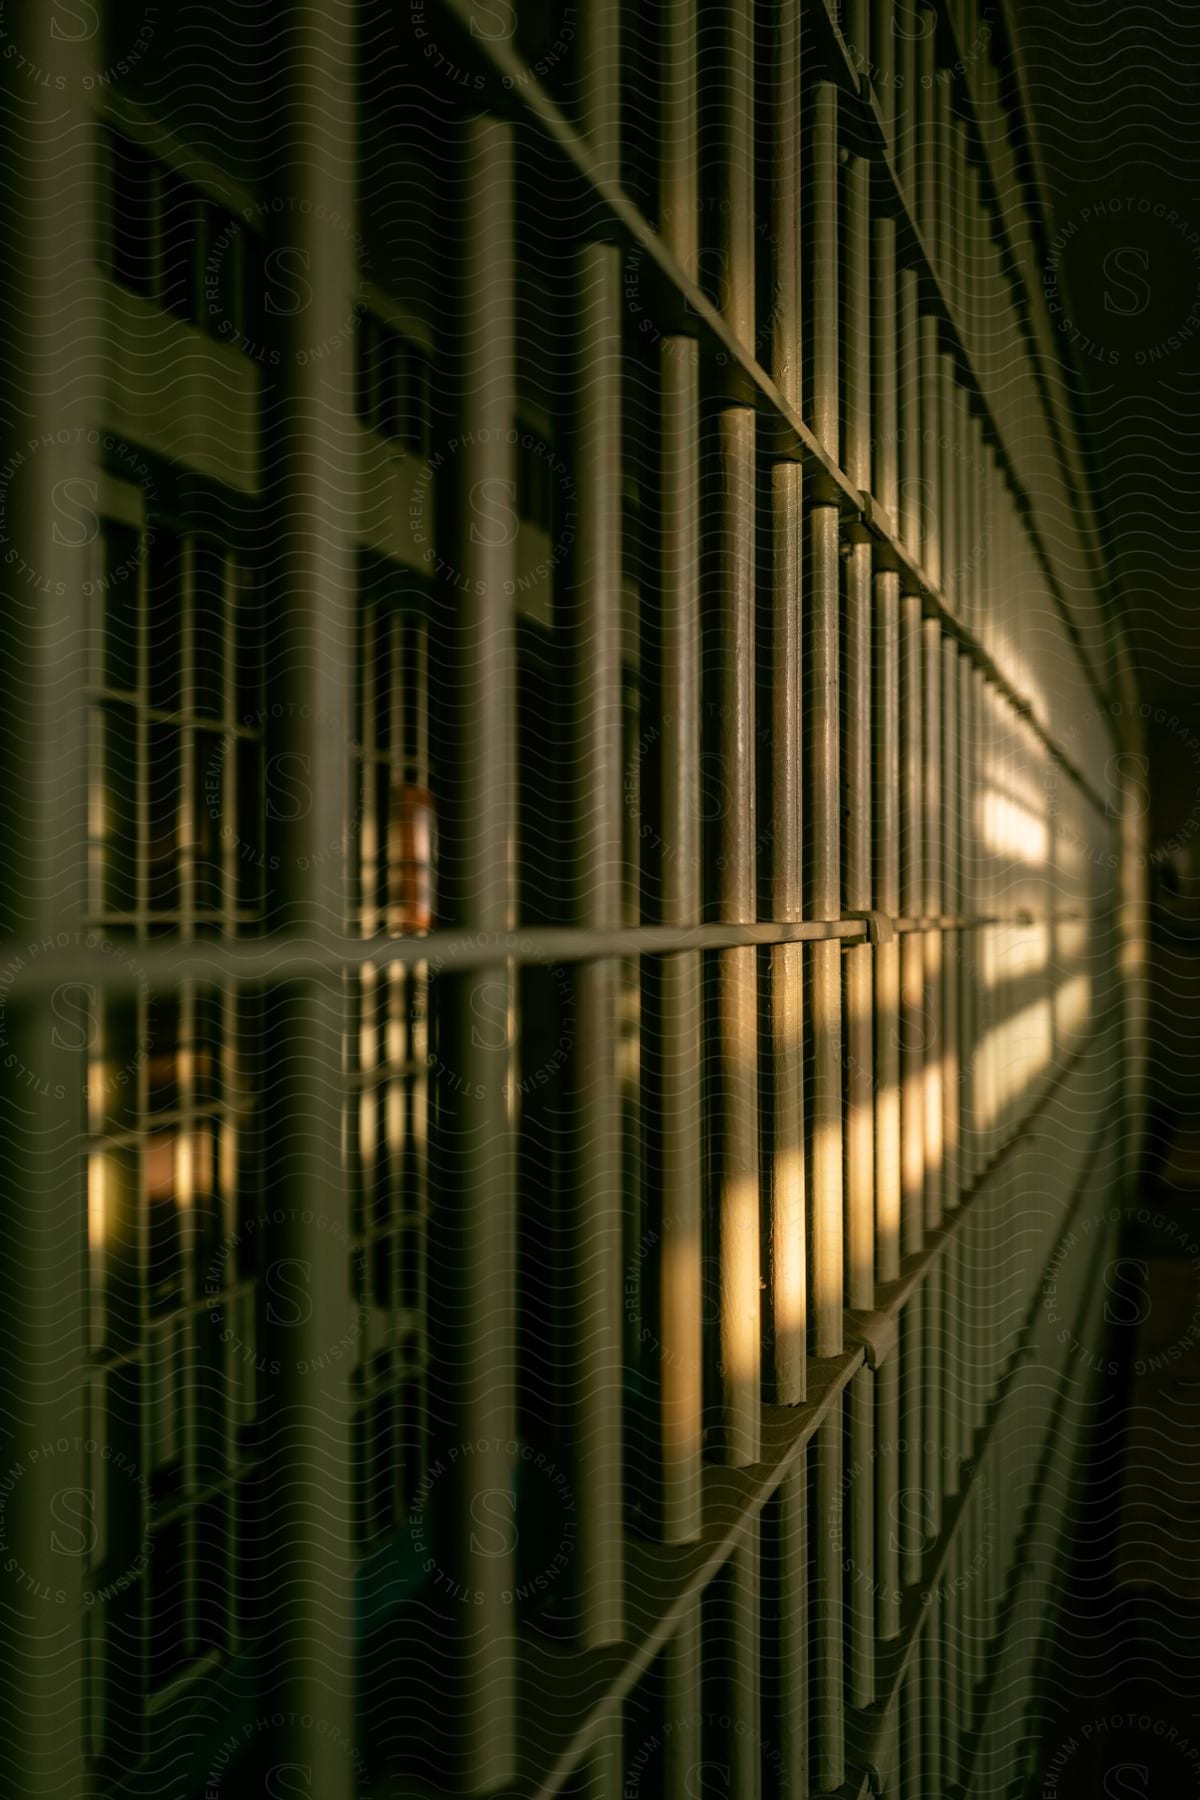 Light shines on bars in a jail corridor in an interior building